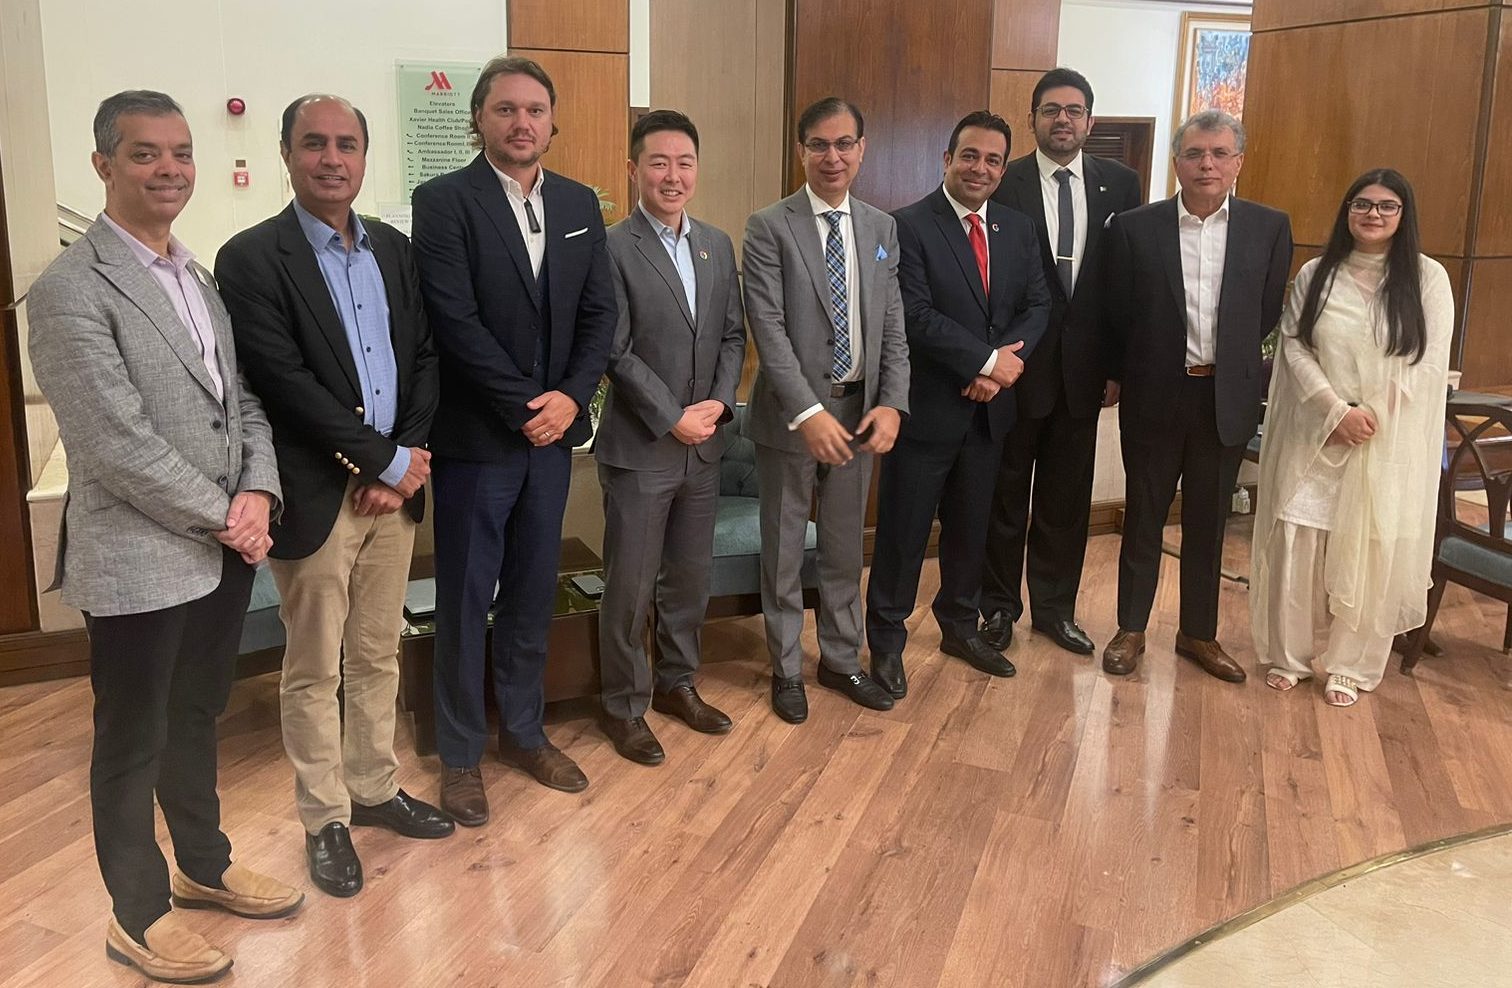 International Consortium of Google for Education, Starlink, PB Tech and Tech Valley Meets Standing Committee of Education at National Assembly of Pakistan